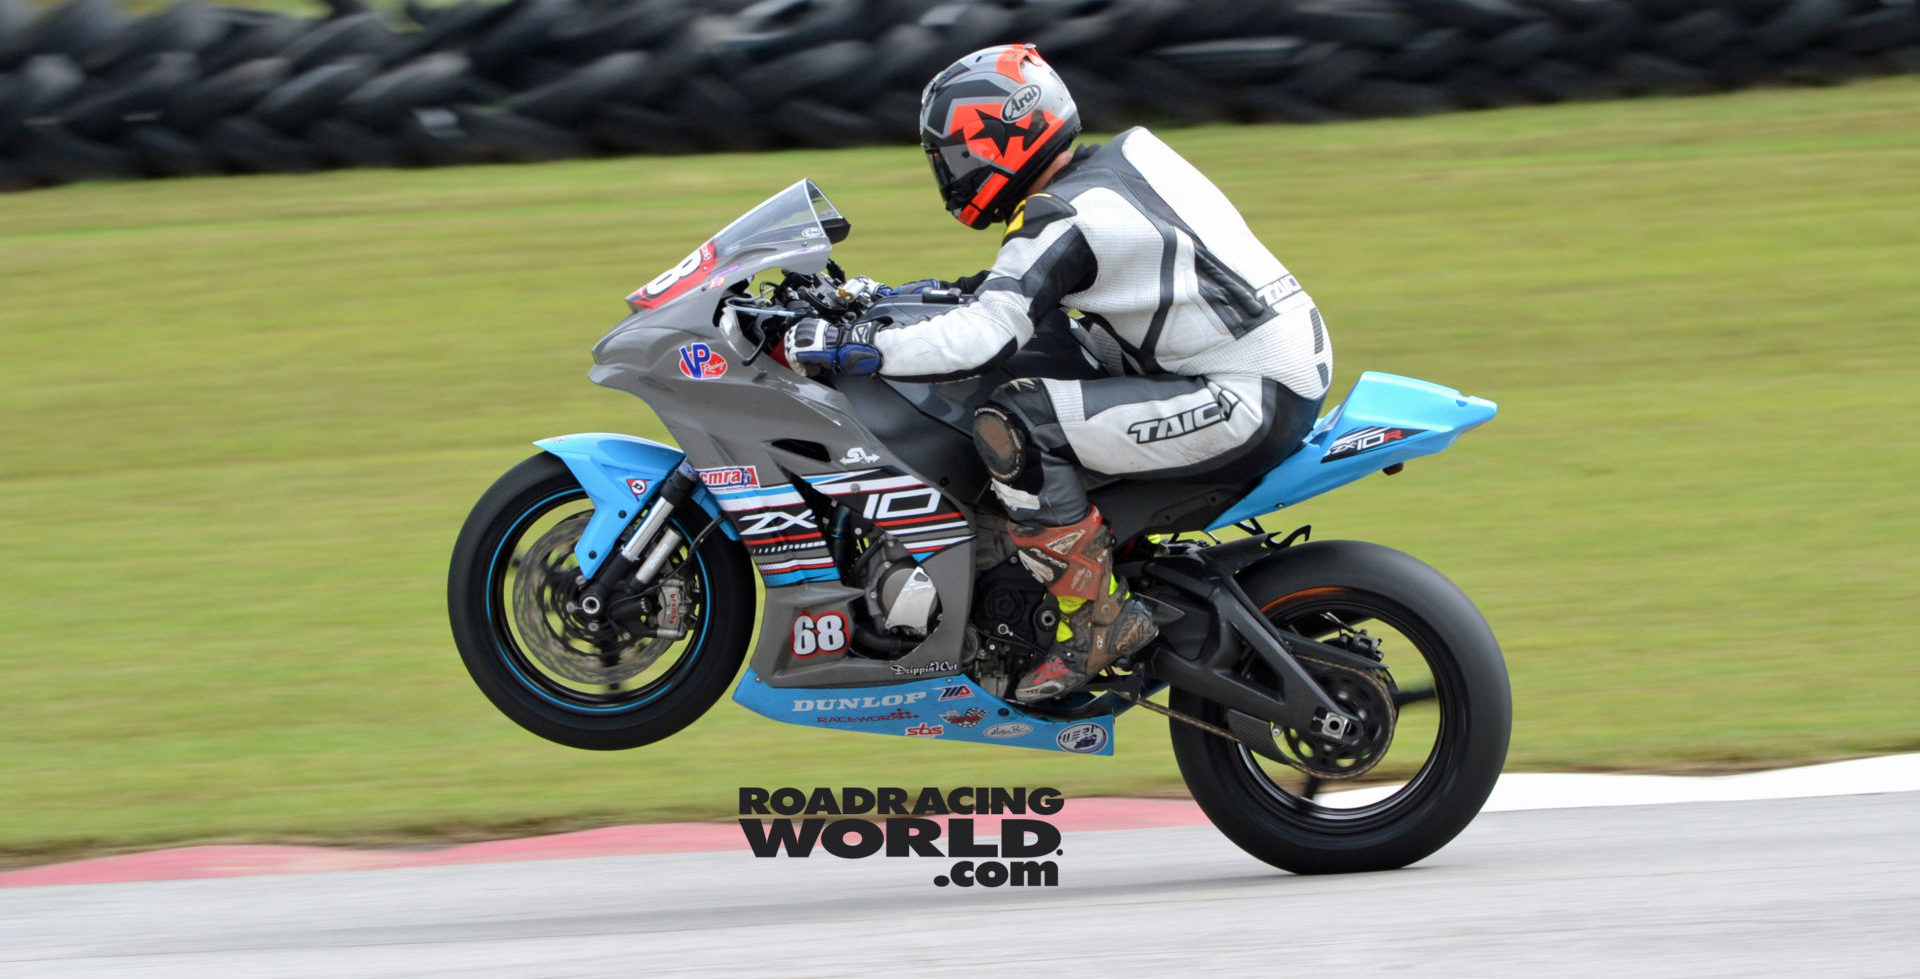 Racer Dustin Dominguez (68) riding a Kawasaki ZX-10R, which has been converted from a streetbike into a race-only machine, at Hallett Motor Racing Circuit. Photo by David Swarts.